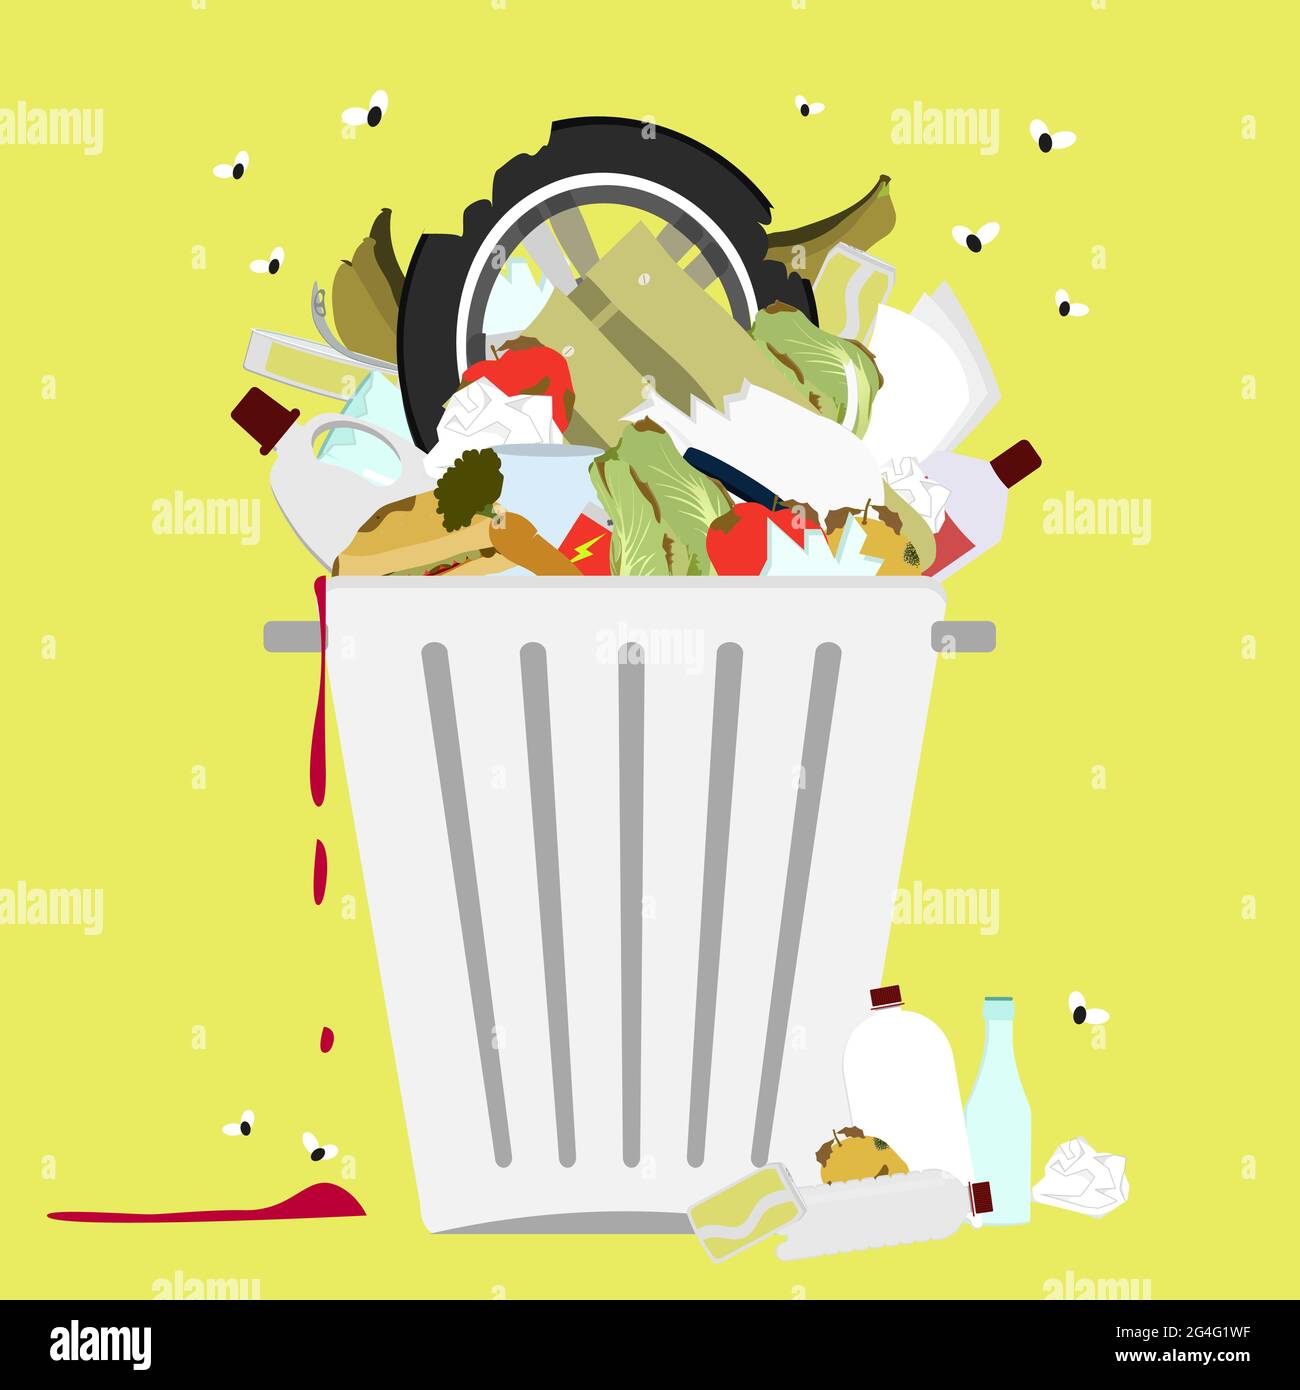 Large trash bin overflowing garbage (rotten fruit, old tires, packing of plastic, metal and glass). Trash fallen to the ground. Flies flying. Stock Vector